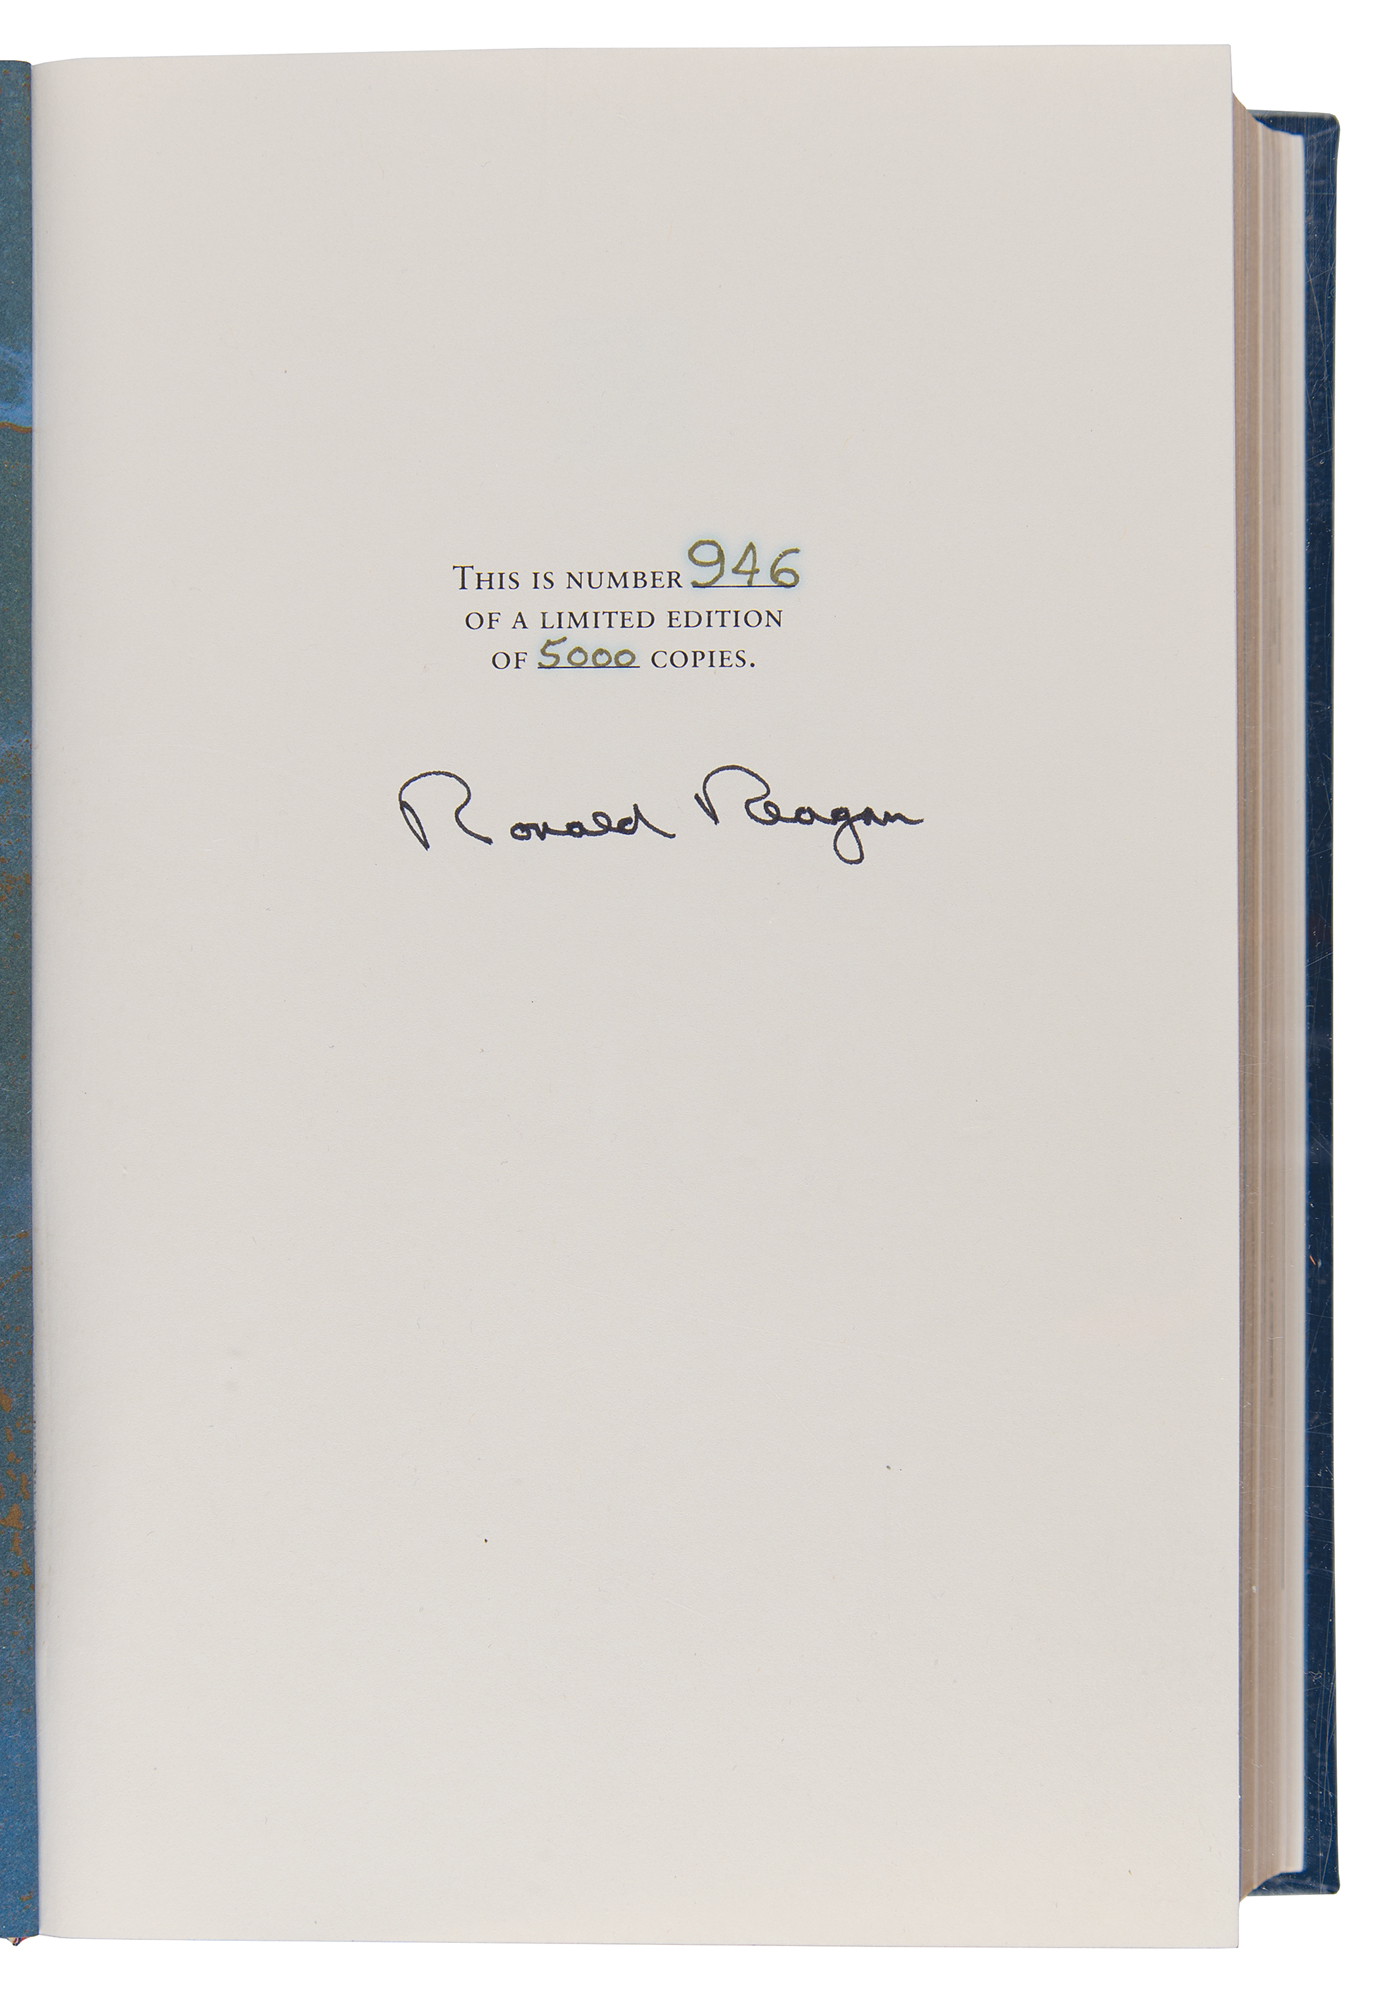 Ronald Reagan Signed Book - Speaking My Mind (Limited first edition)